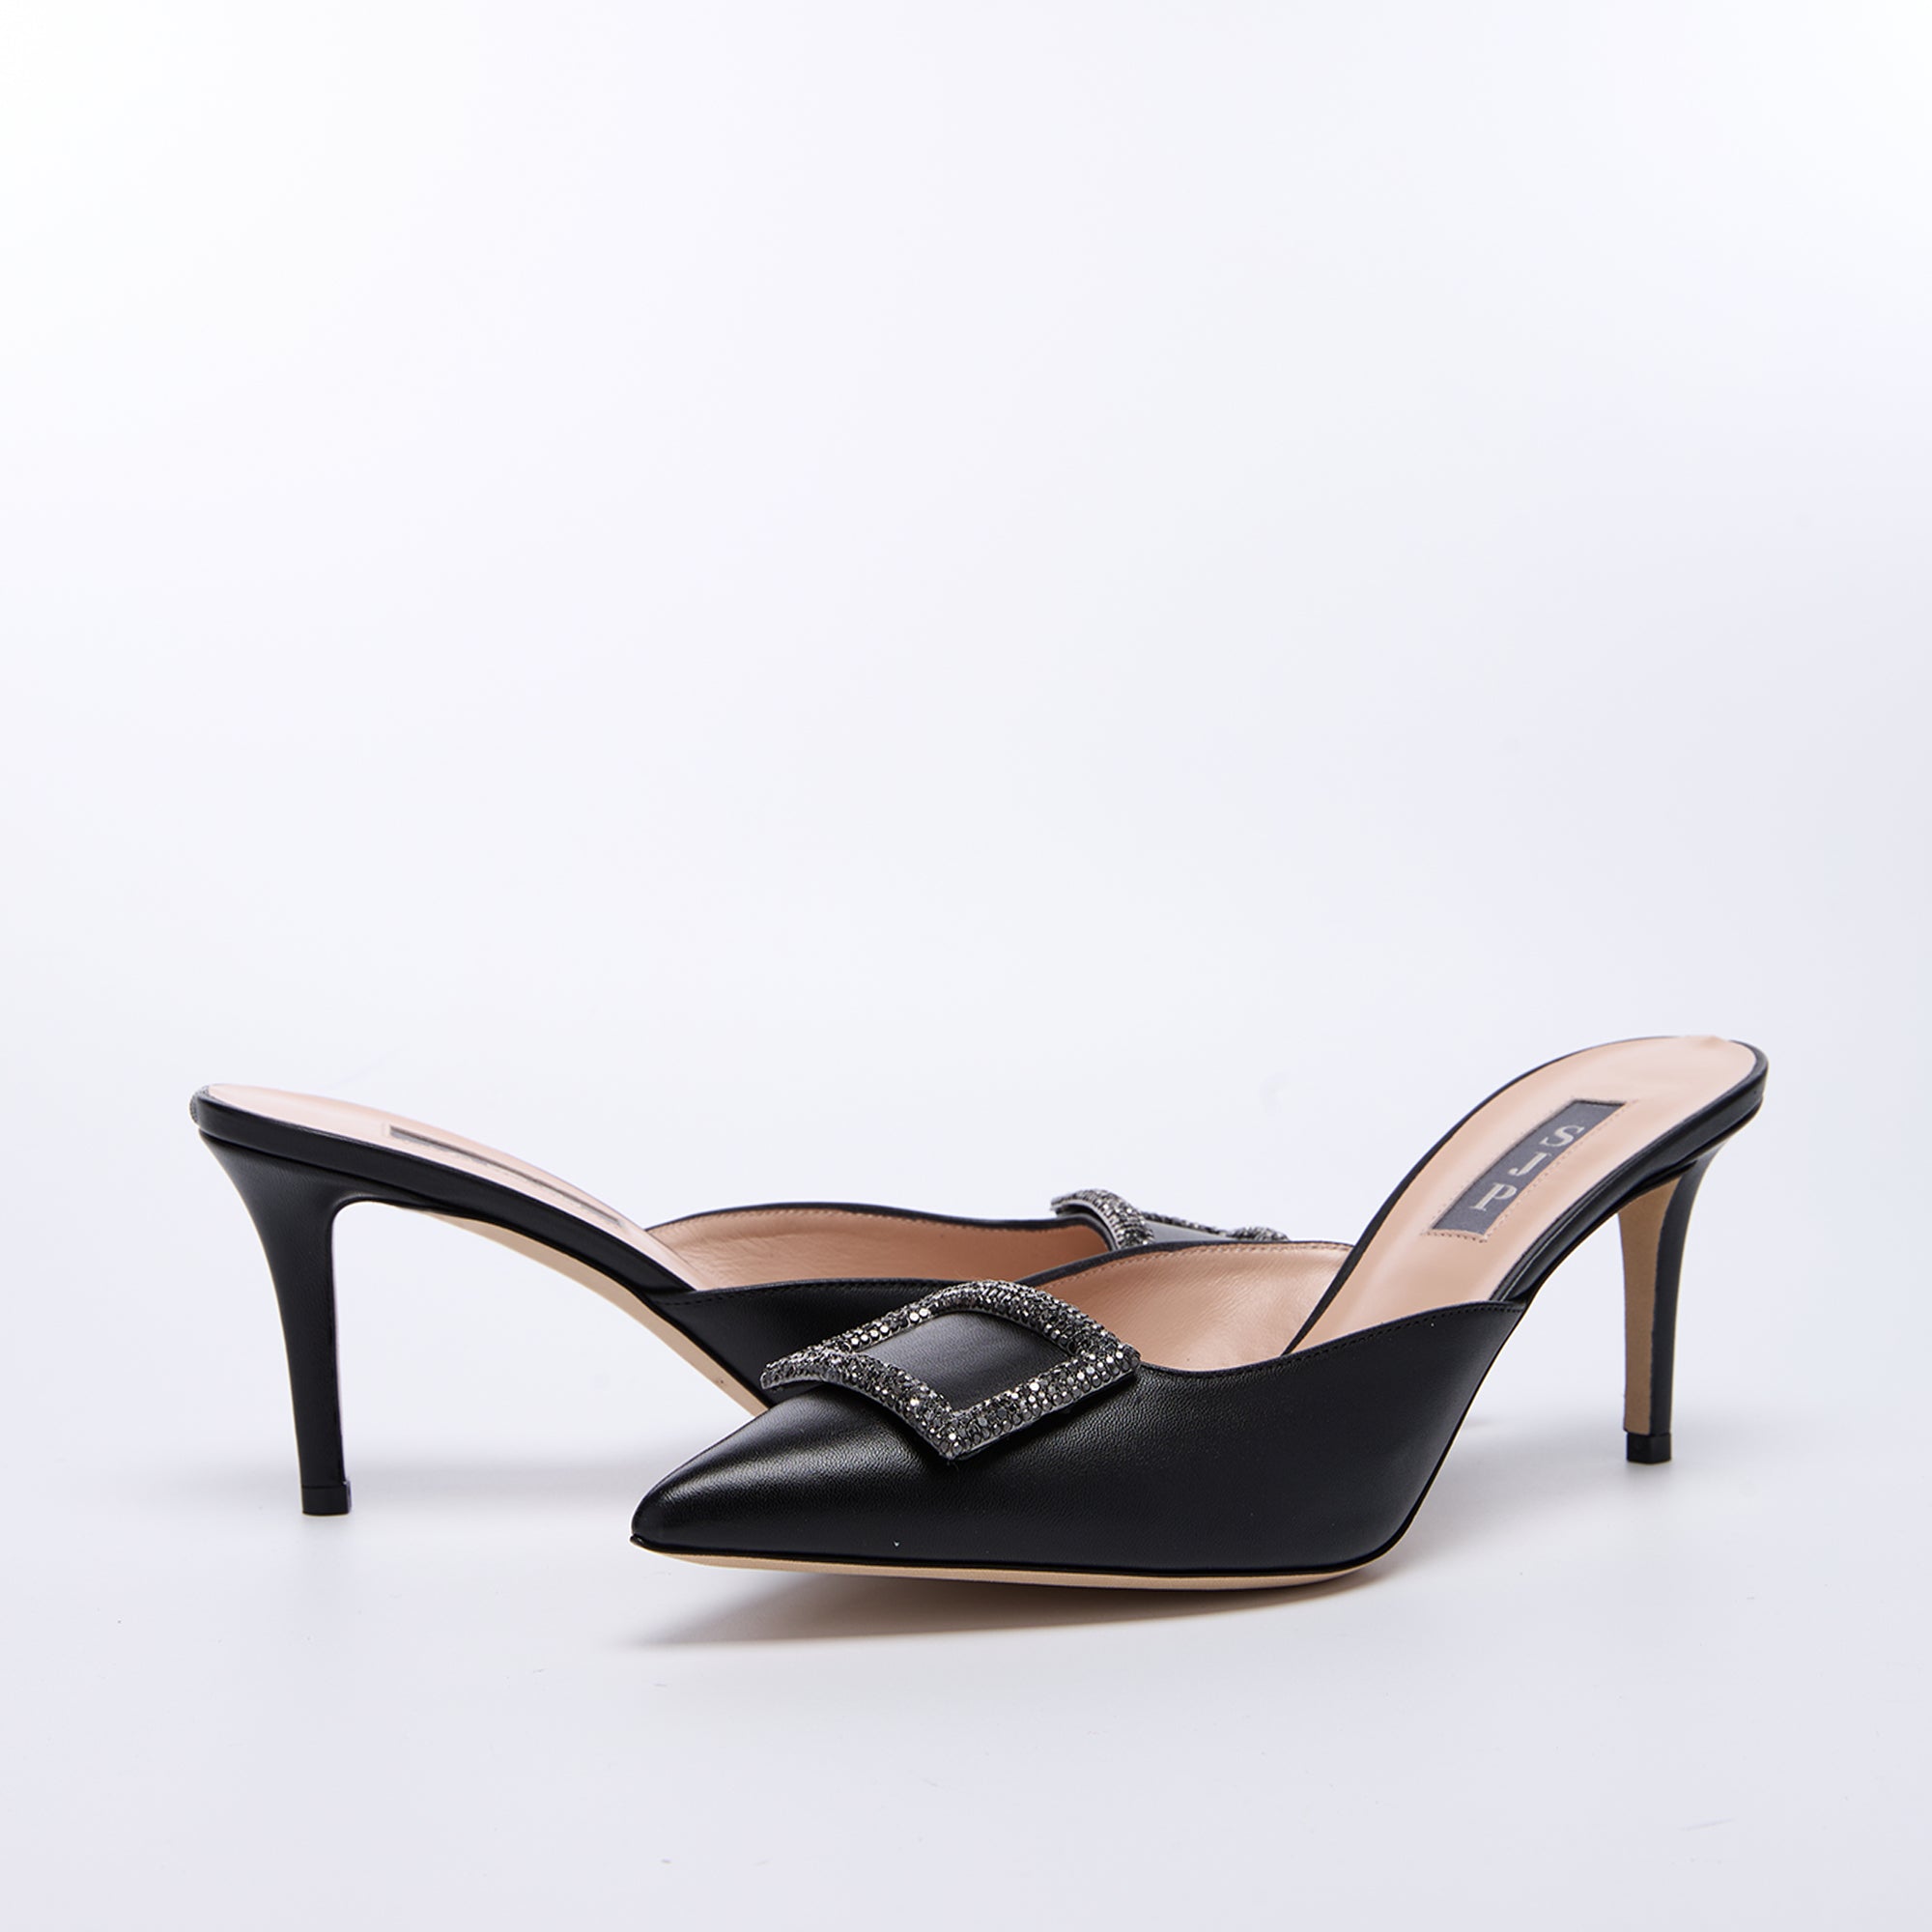 SJP by Sarah Jessica Parker Noble 70mm Black Leather Mules